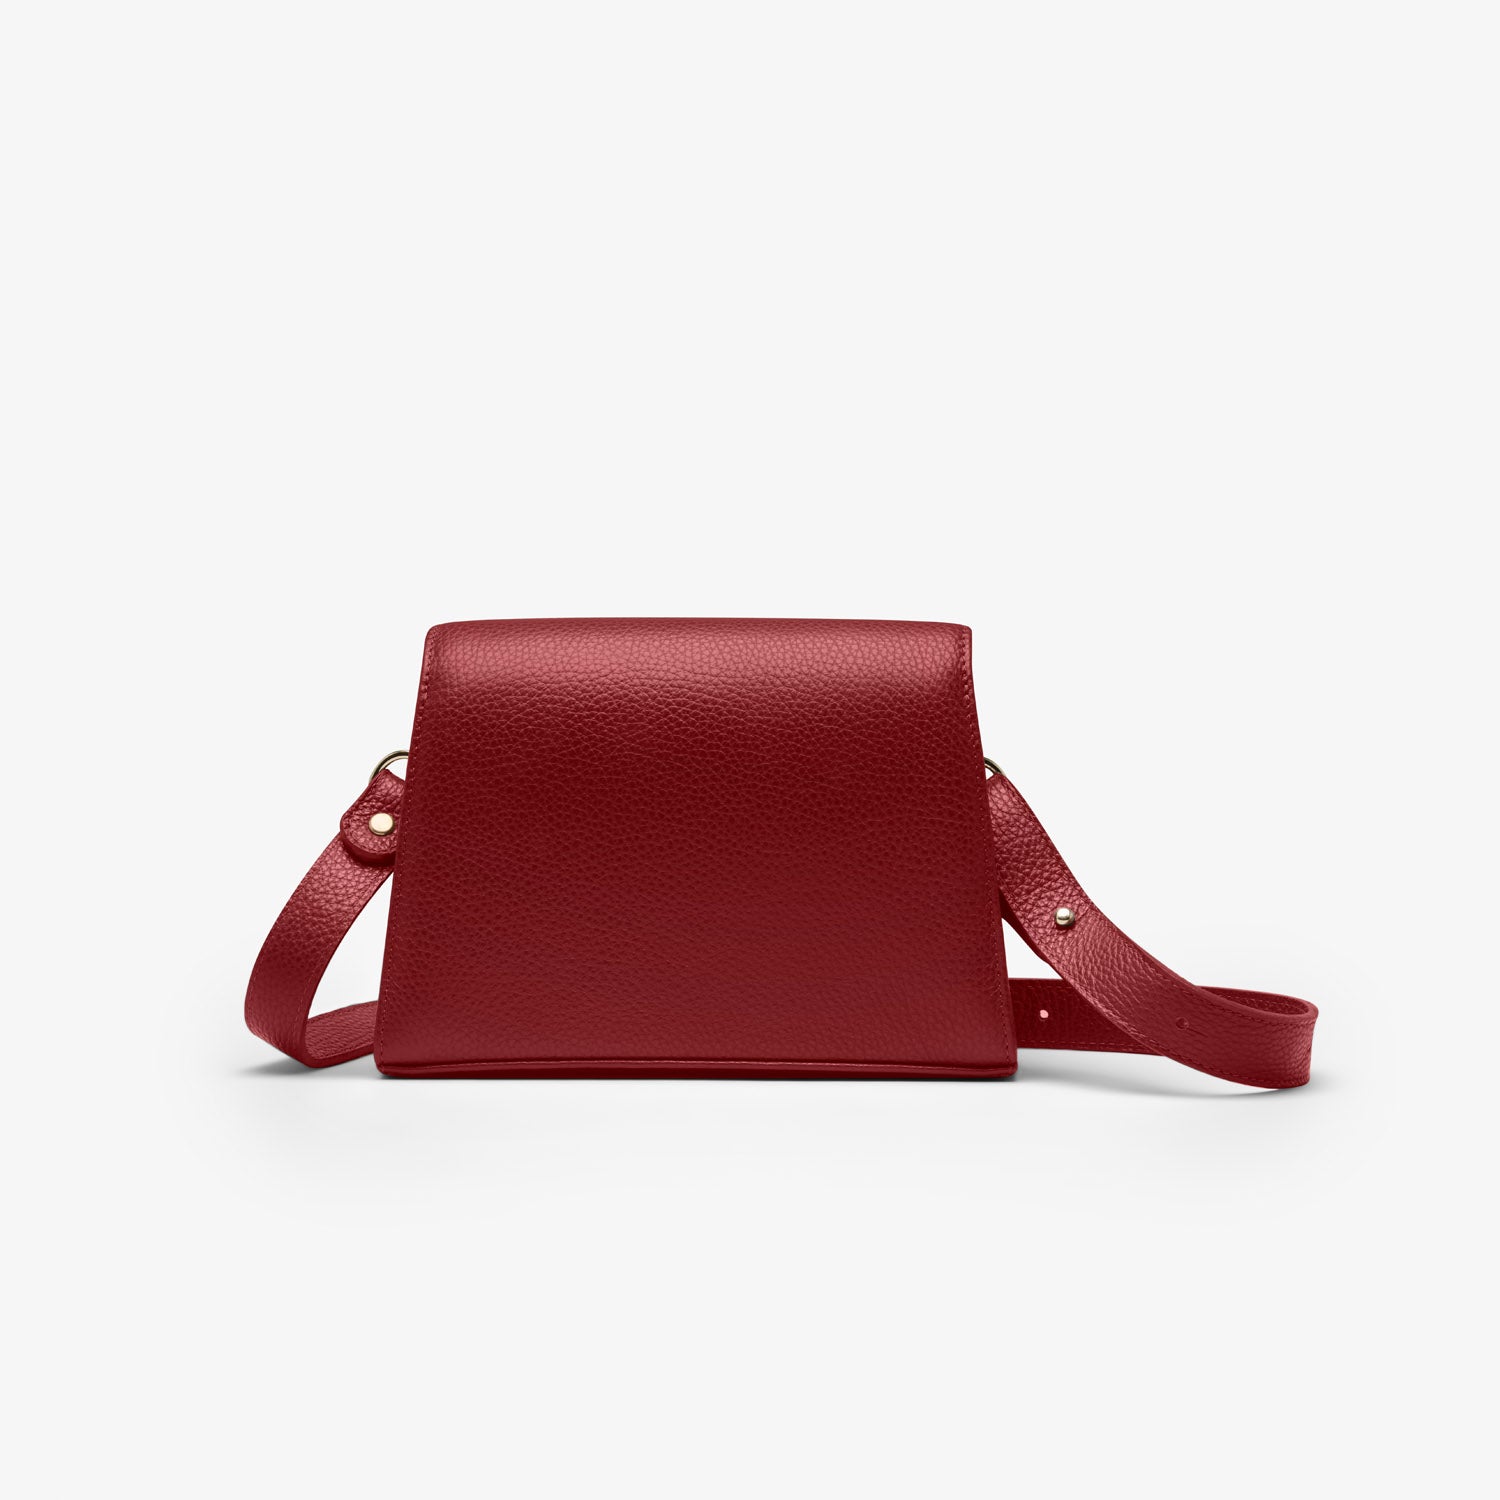 Shows the backside of a red grained leather handbag with light gold metalware and an adjustable strap for a comfortable crossbody or shoulder fit. 